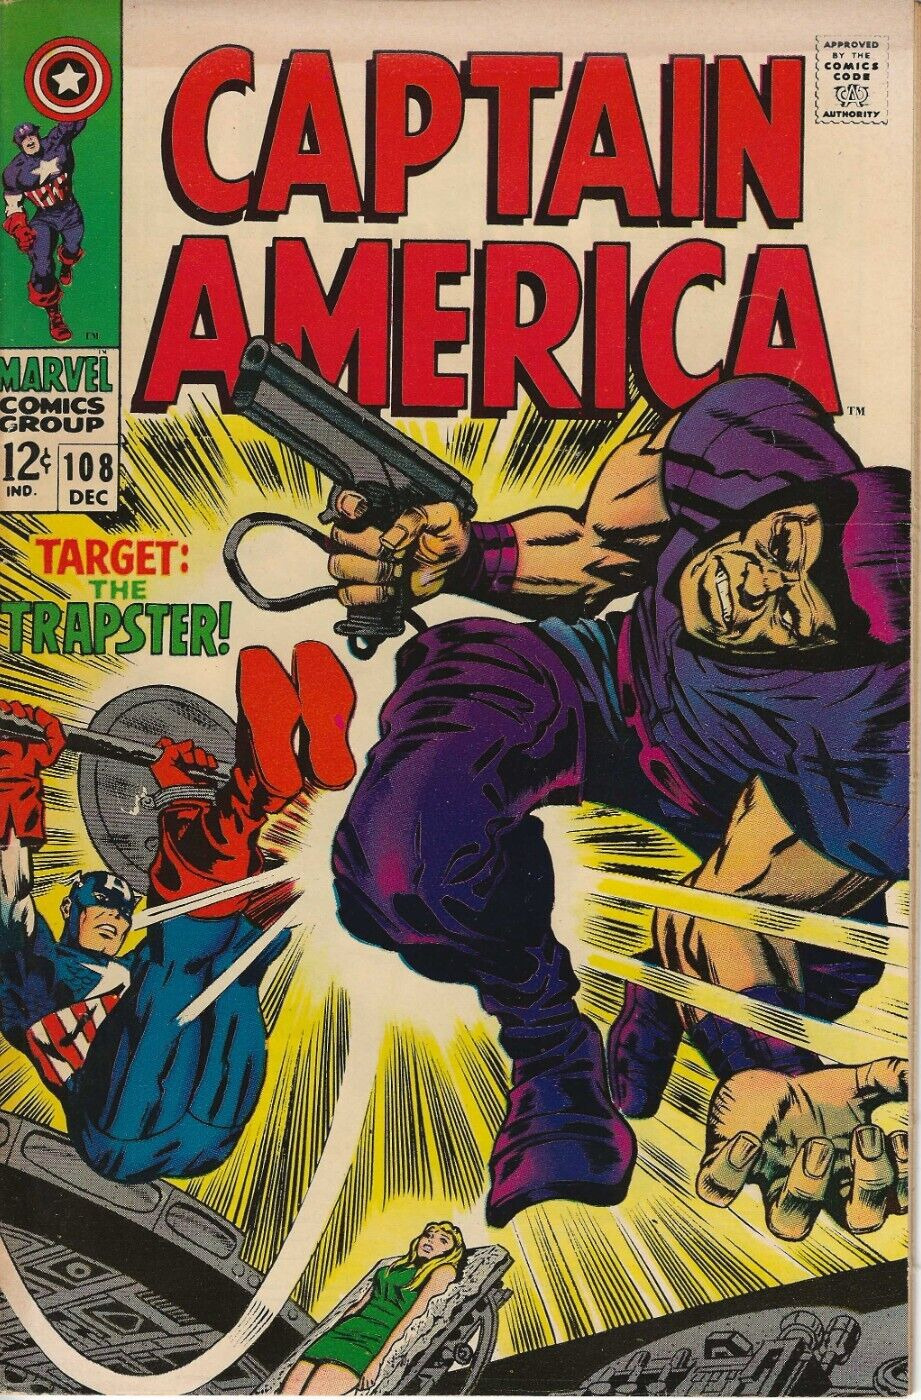 CAPTAIN AMERICA # 108 - Very Fine TARGET: THE TRAPSTER-NICK FURY-SHARON CARTER